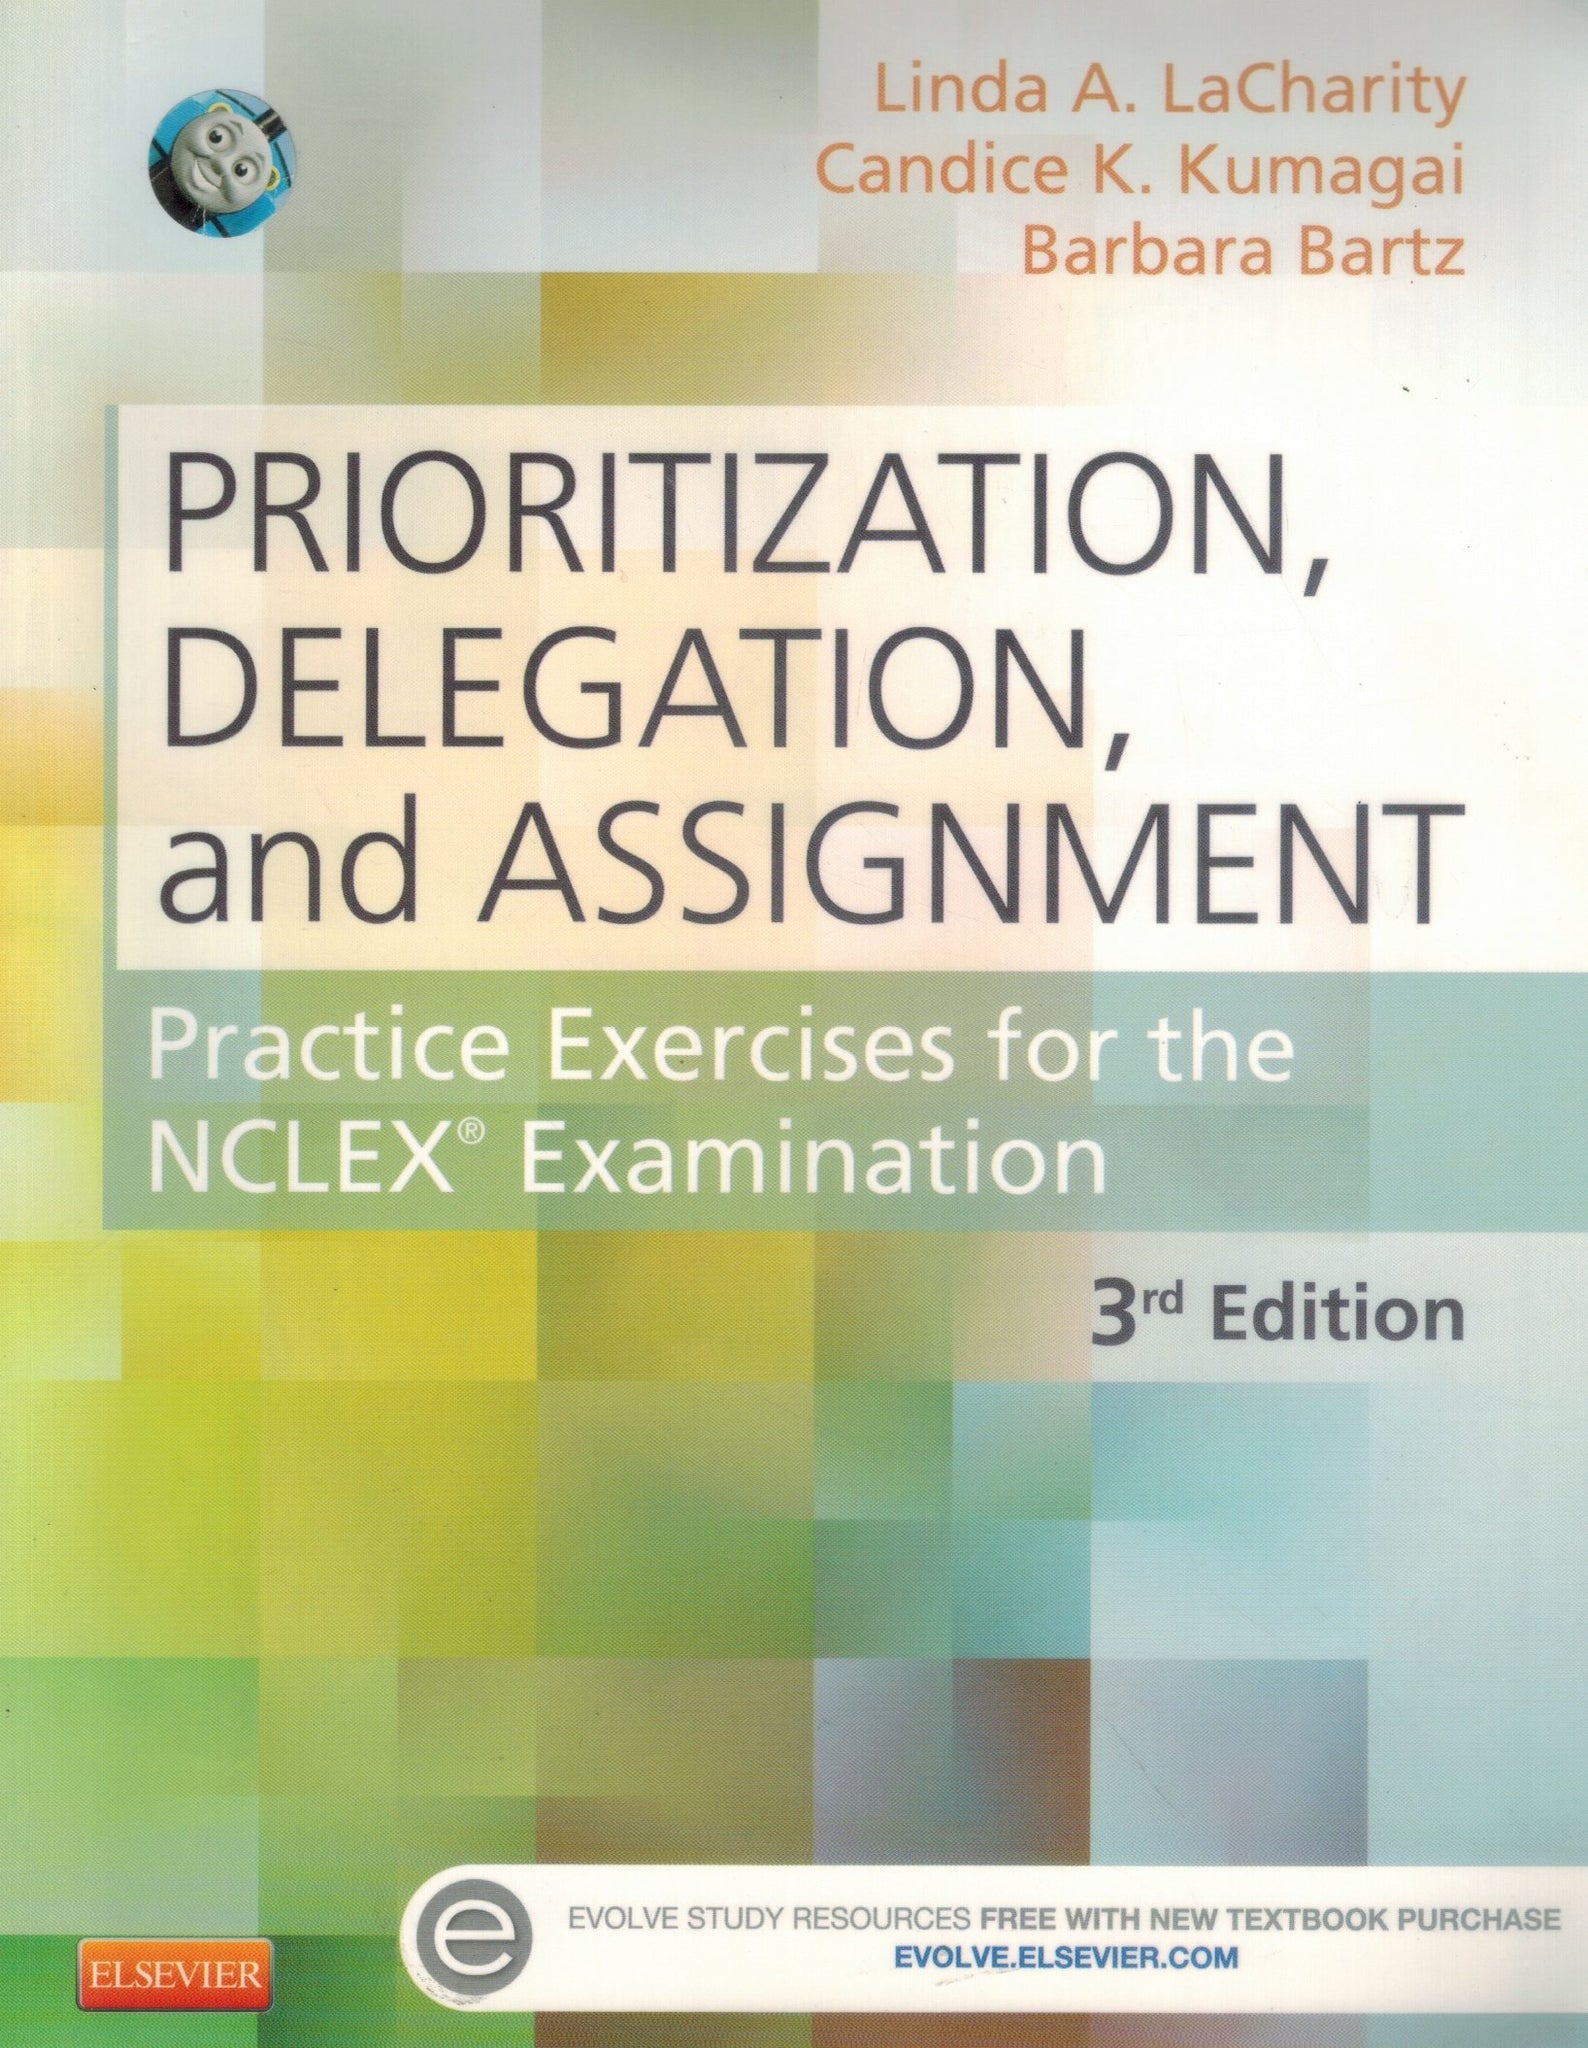 Prioritization, Delegation, and Assignment  Practice Exercises for the  NCLEX Examination